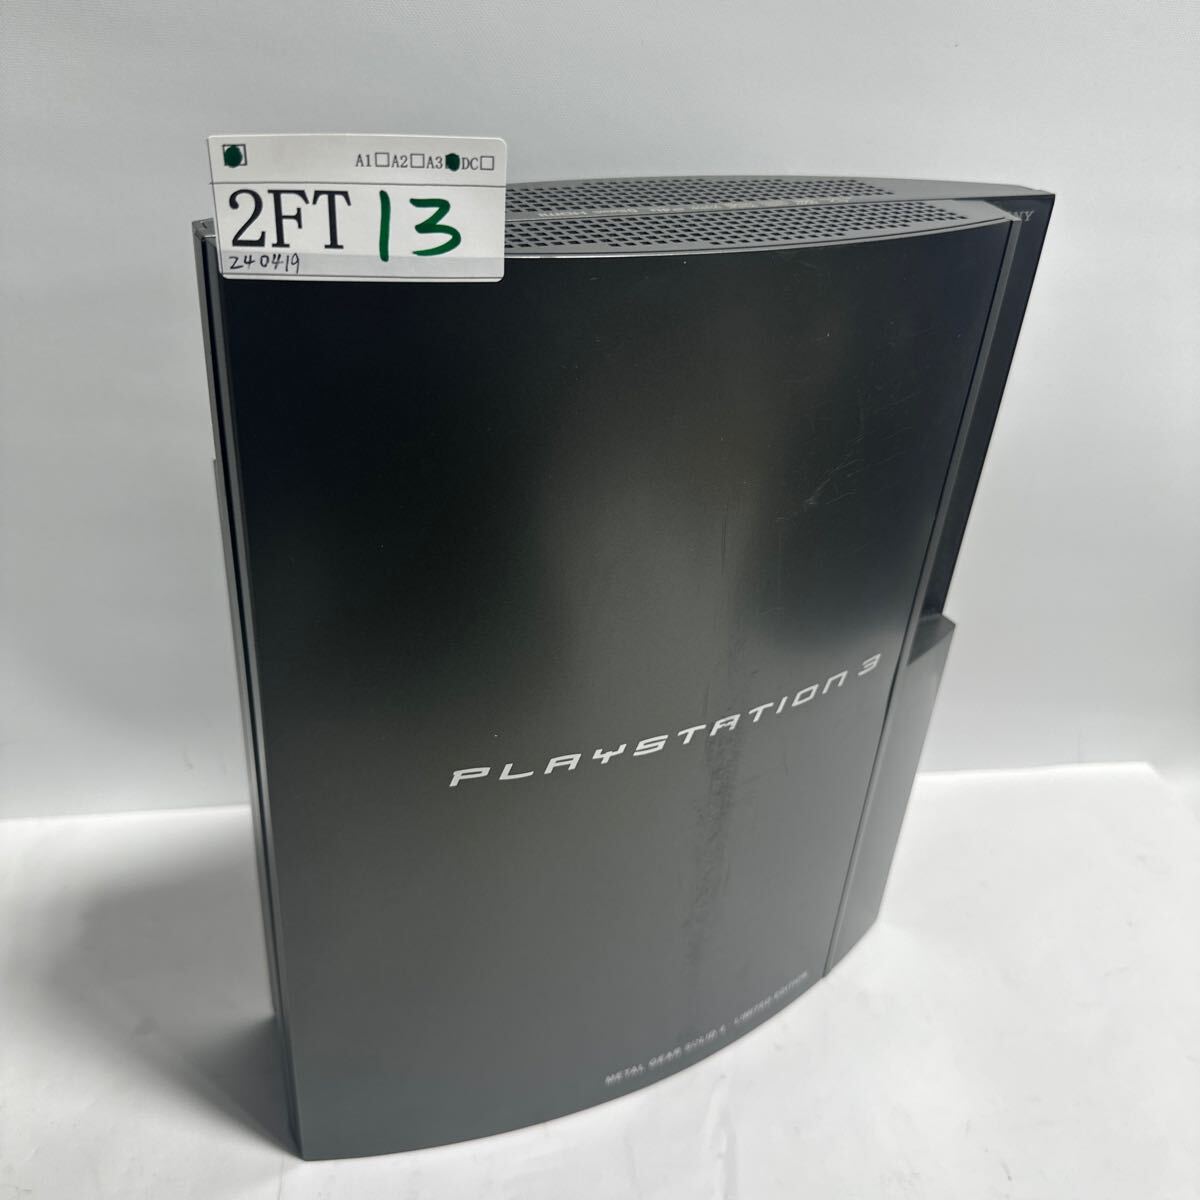 「2FT13」PS3 本体 40GB METAL GEAR SOLID 4 LIMITED EDITION CECHH00 初期化済 動作品 コントローラー無し本体のみ(240419)の画像2